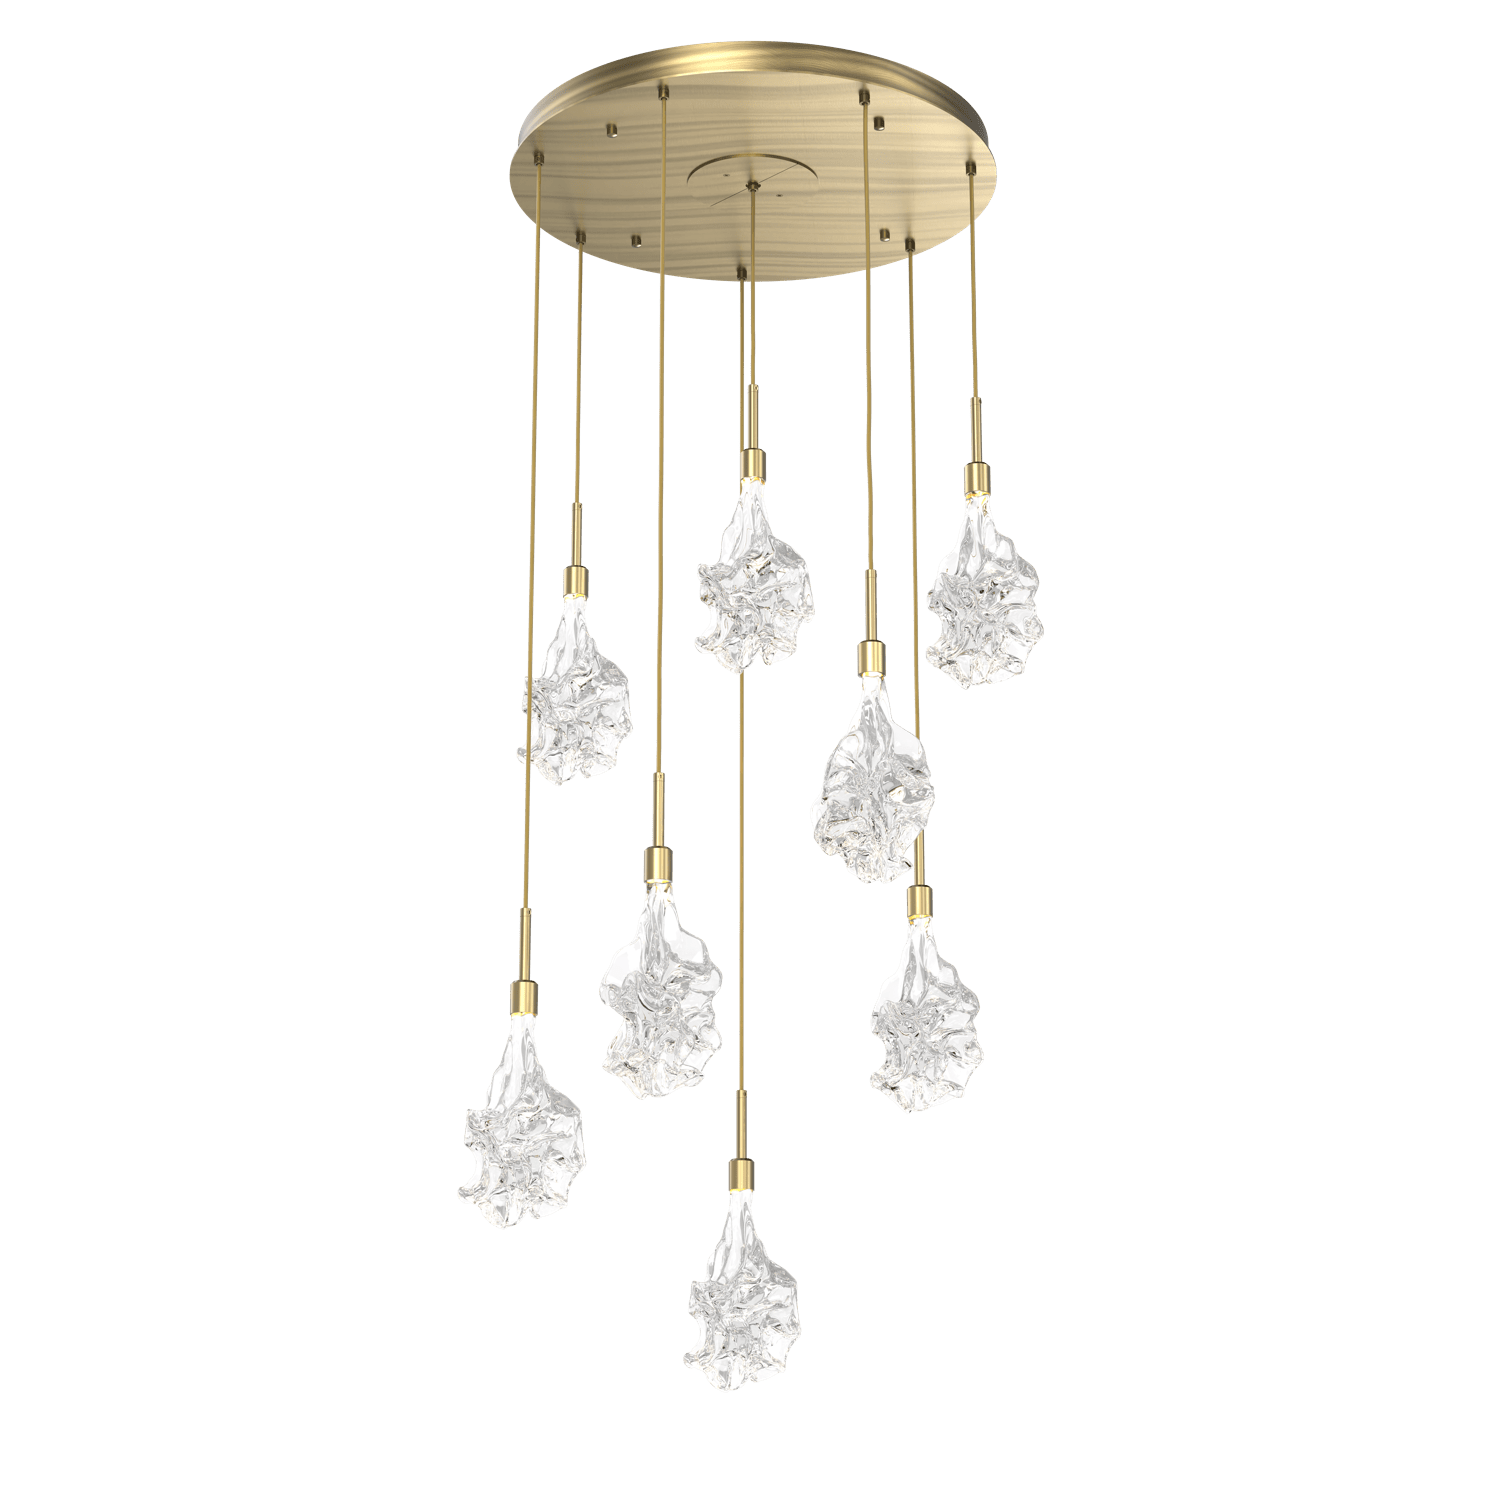 CHB0059-08-HB-Hammerton-Studio-Blossom-8-light-round-pendant-chandelier-with-heritage-brass-finish-and-clear-handblown-crystal-glass-shades-and-LED-lamping